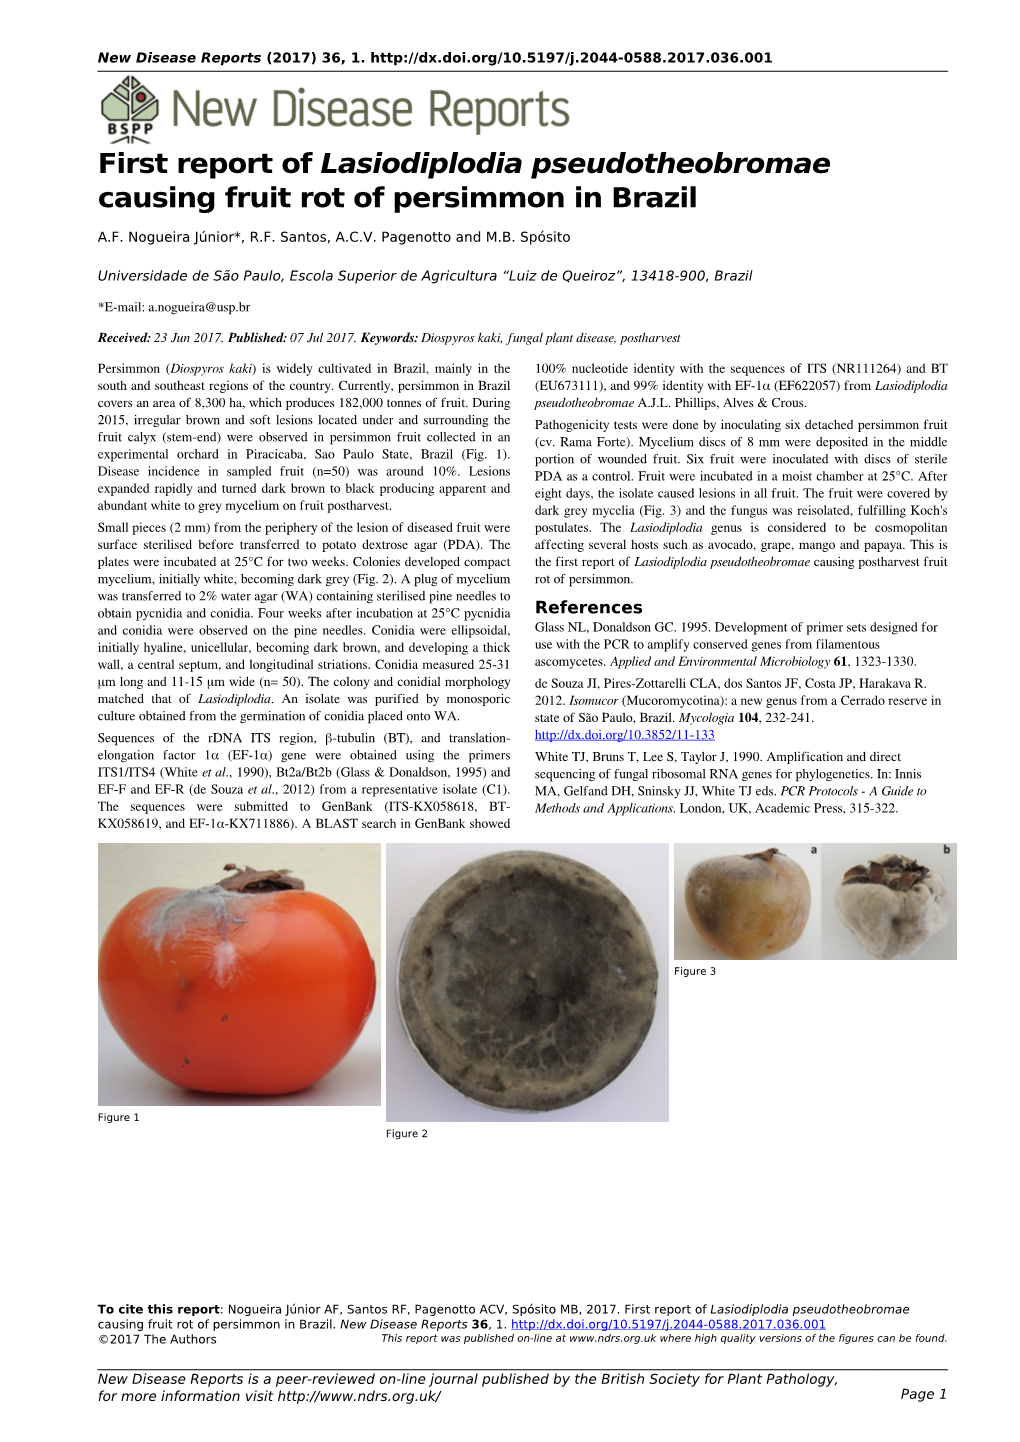 First Report of Lasiodiplodia Pseudotheobromae Causing Fruit Rot of Persimmon in Brazil